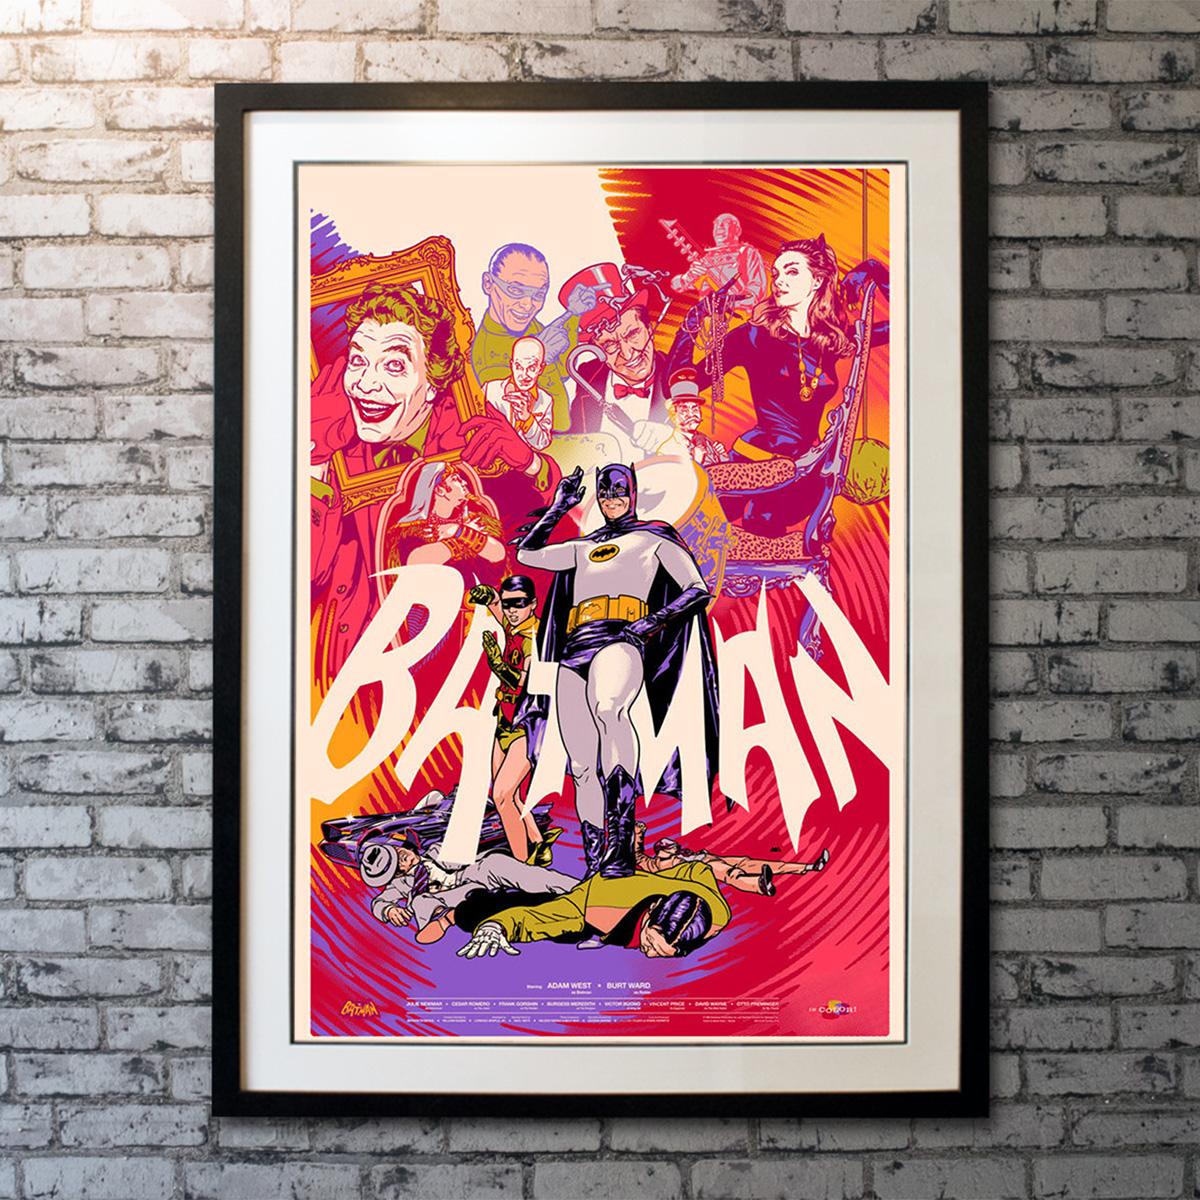 Rare MONDO-style 2014 Batman print by Martin Ansin. Numbered Edition of 175.